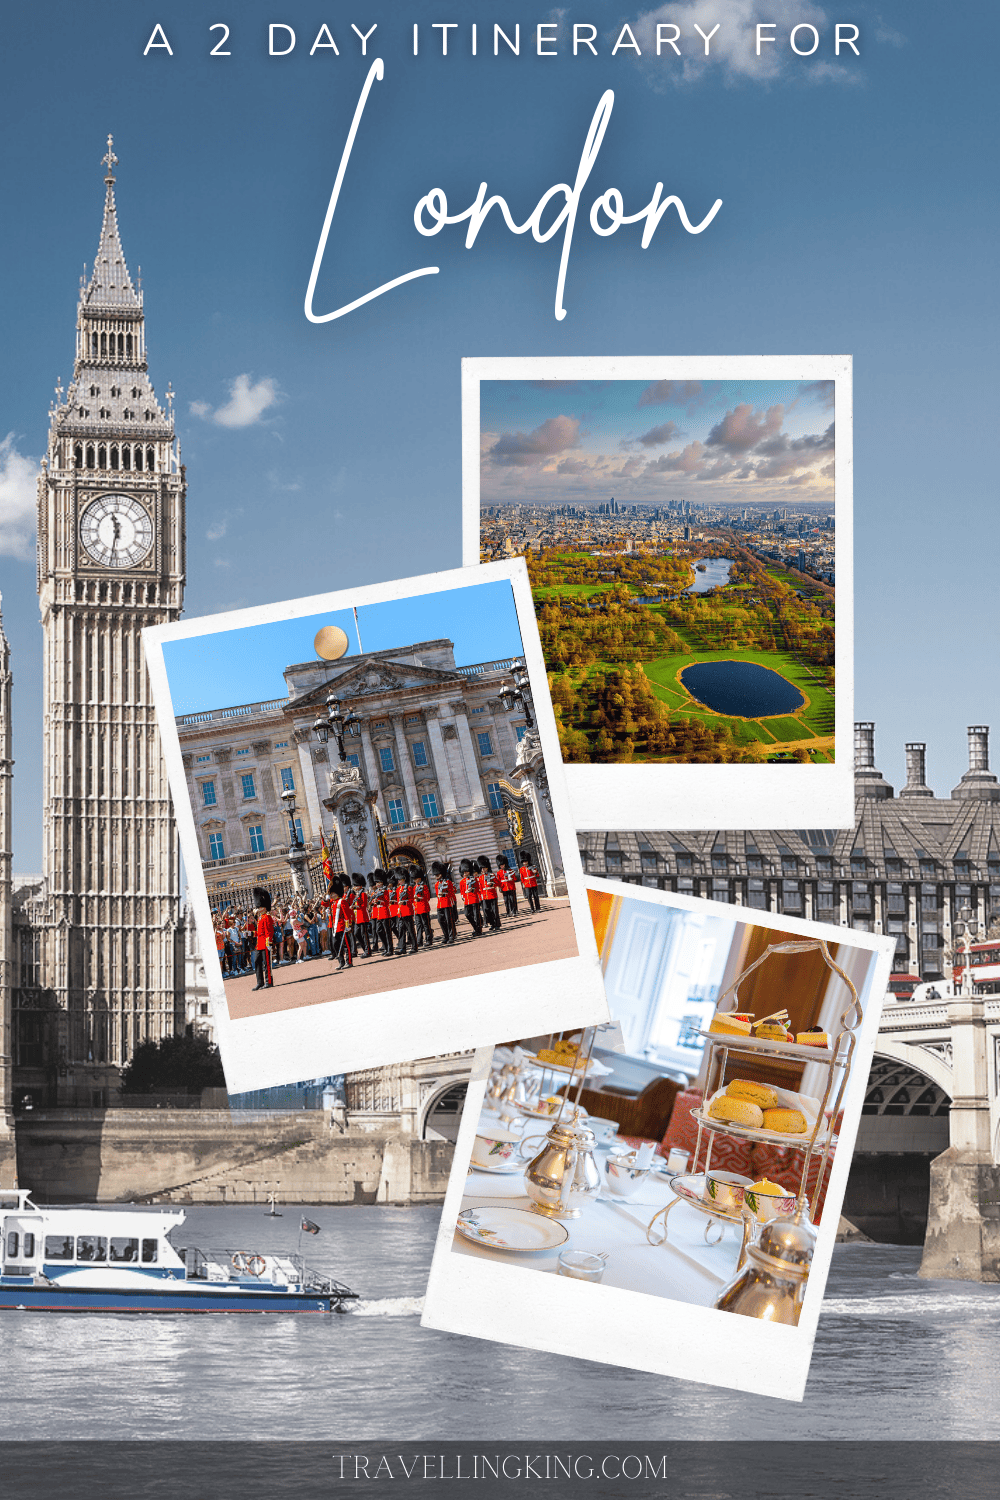 48 Hours in London - 2 Day Itinerary